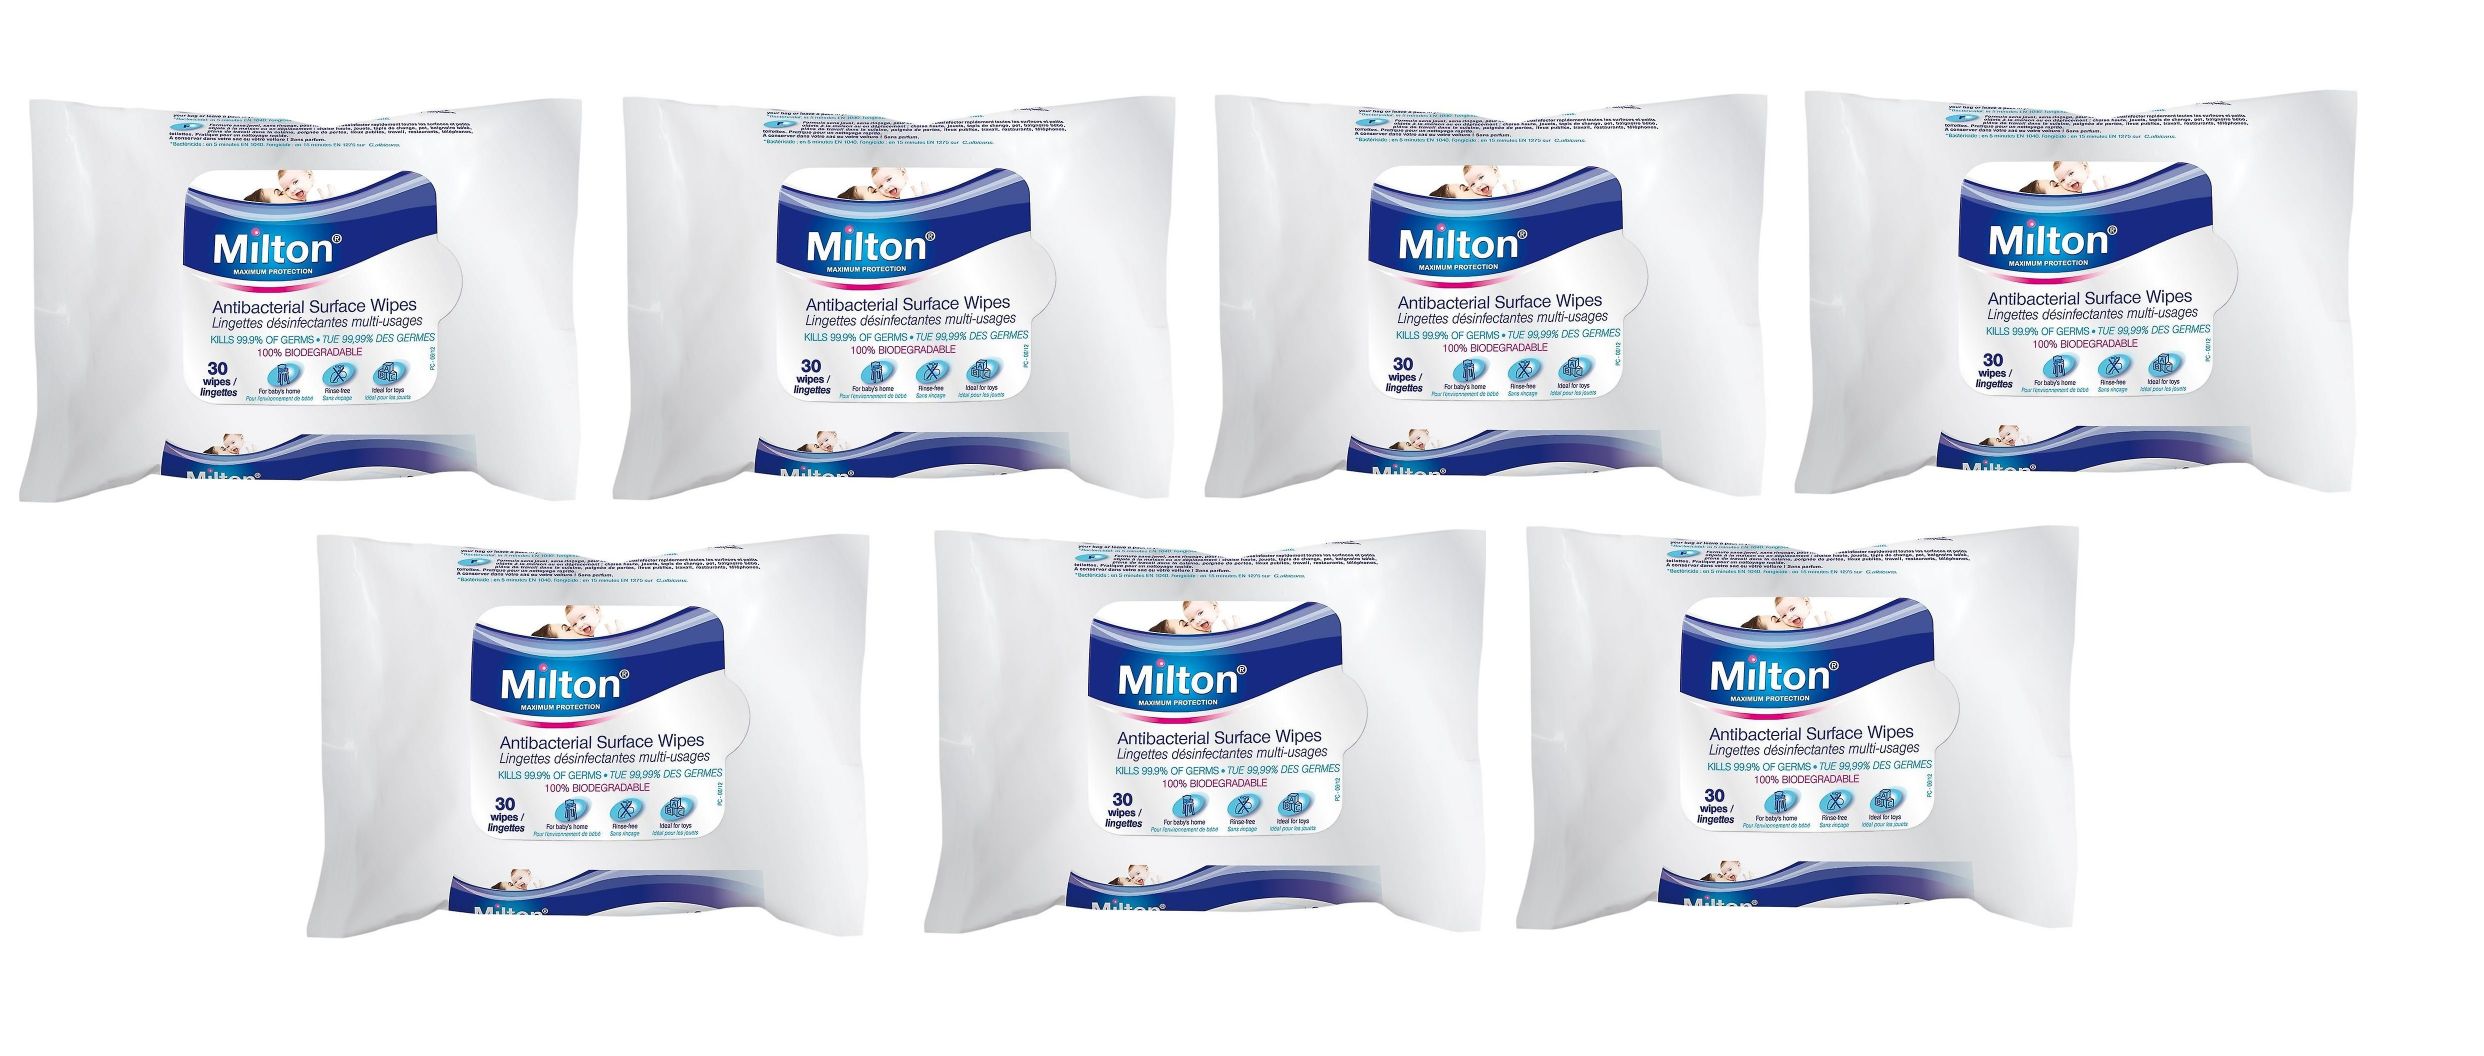 Milton Anti-Bacterial Surface Wipes 30s - Pack of 7